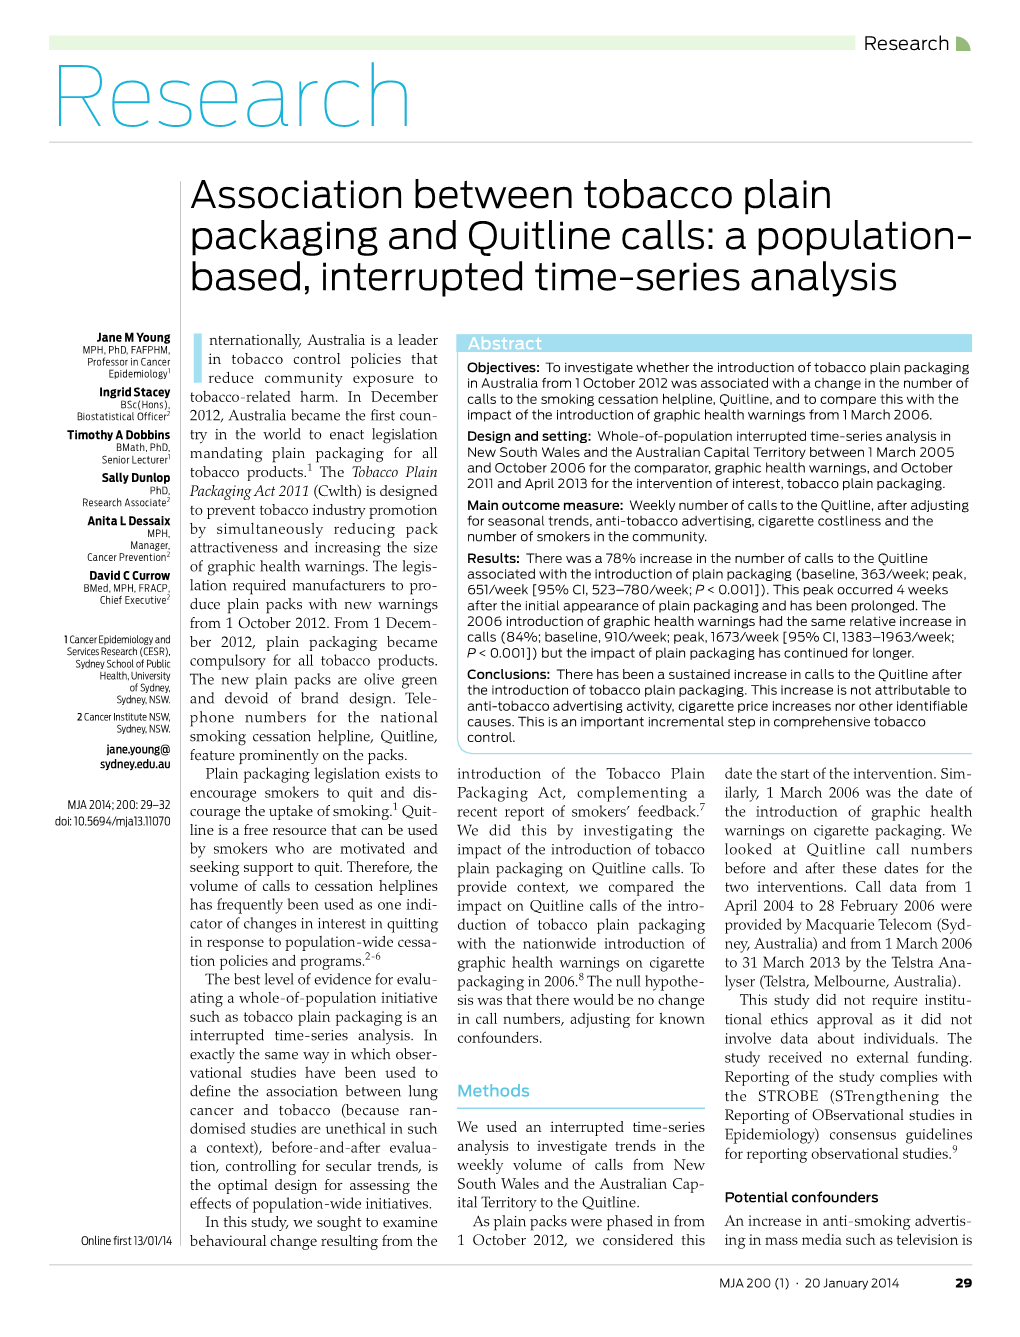 Research Research Association Between Tobacco Plain Packaging and Quitline Calls: a Population- Based, Interrupted Time-Series Analysis